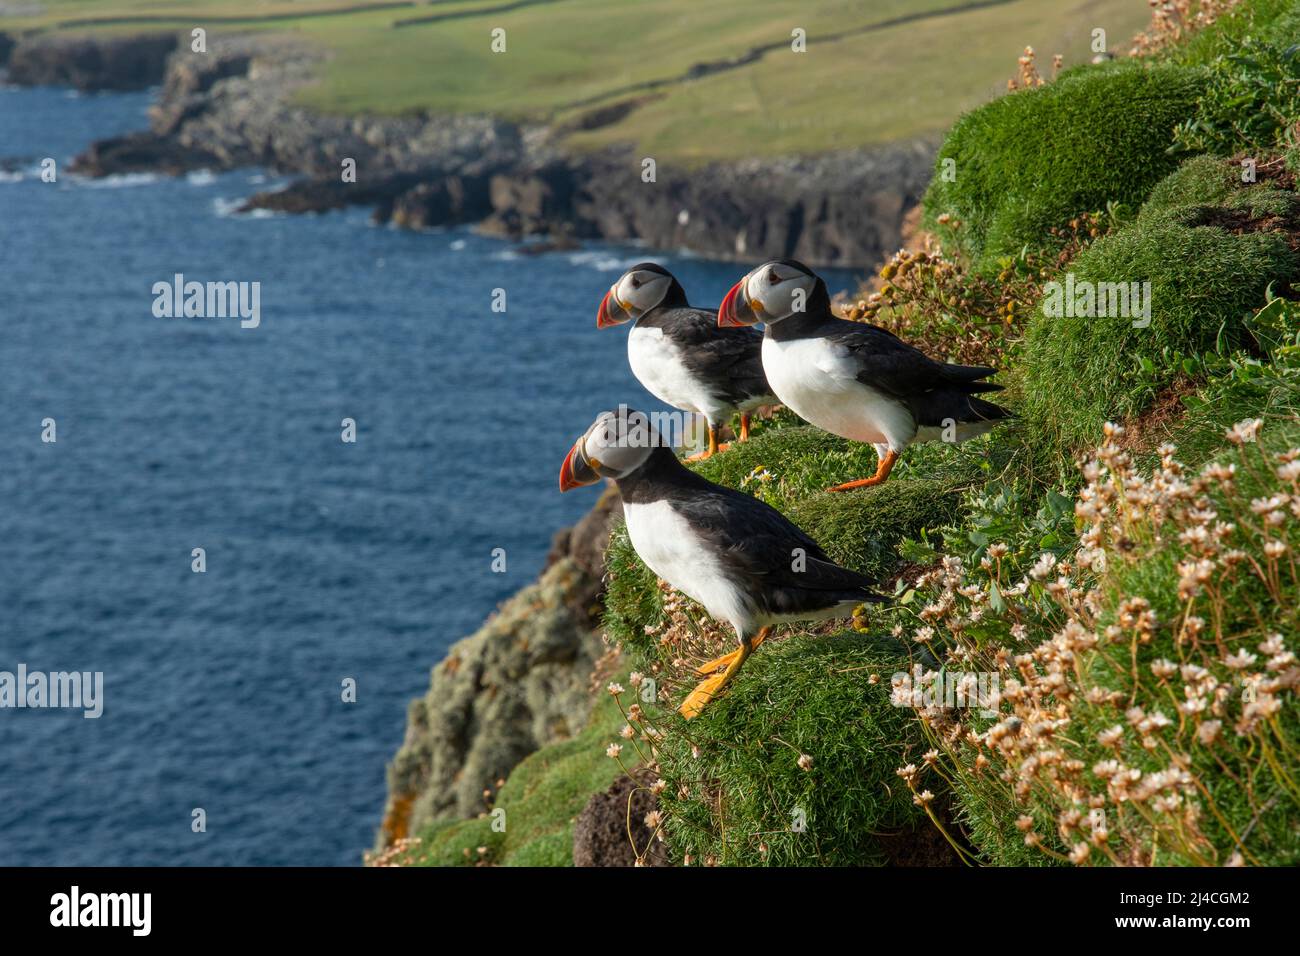 cliff top perch for puffin Stock Photo